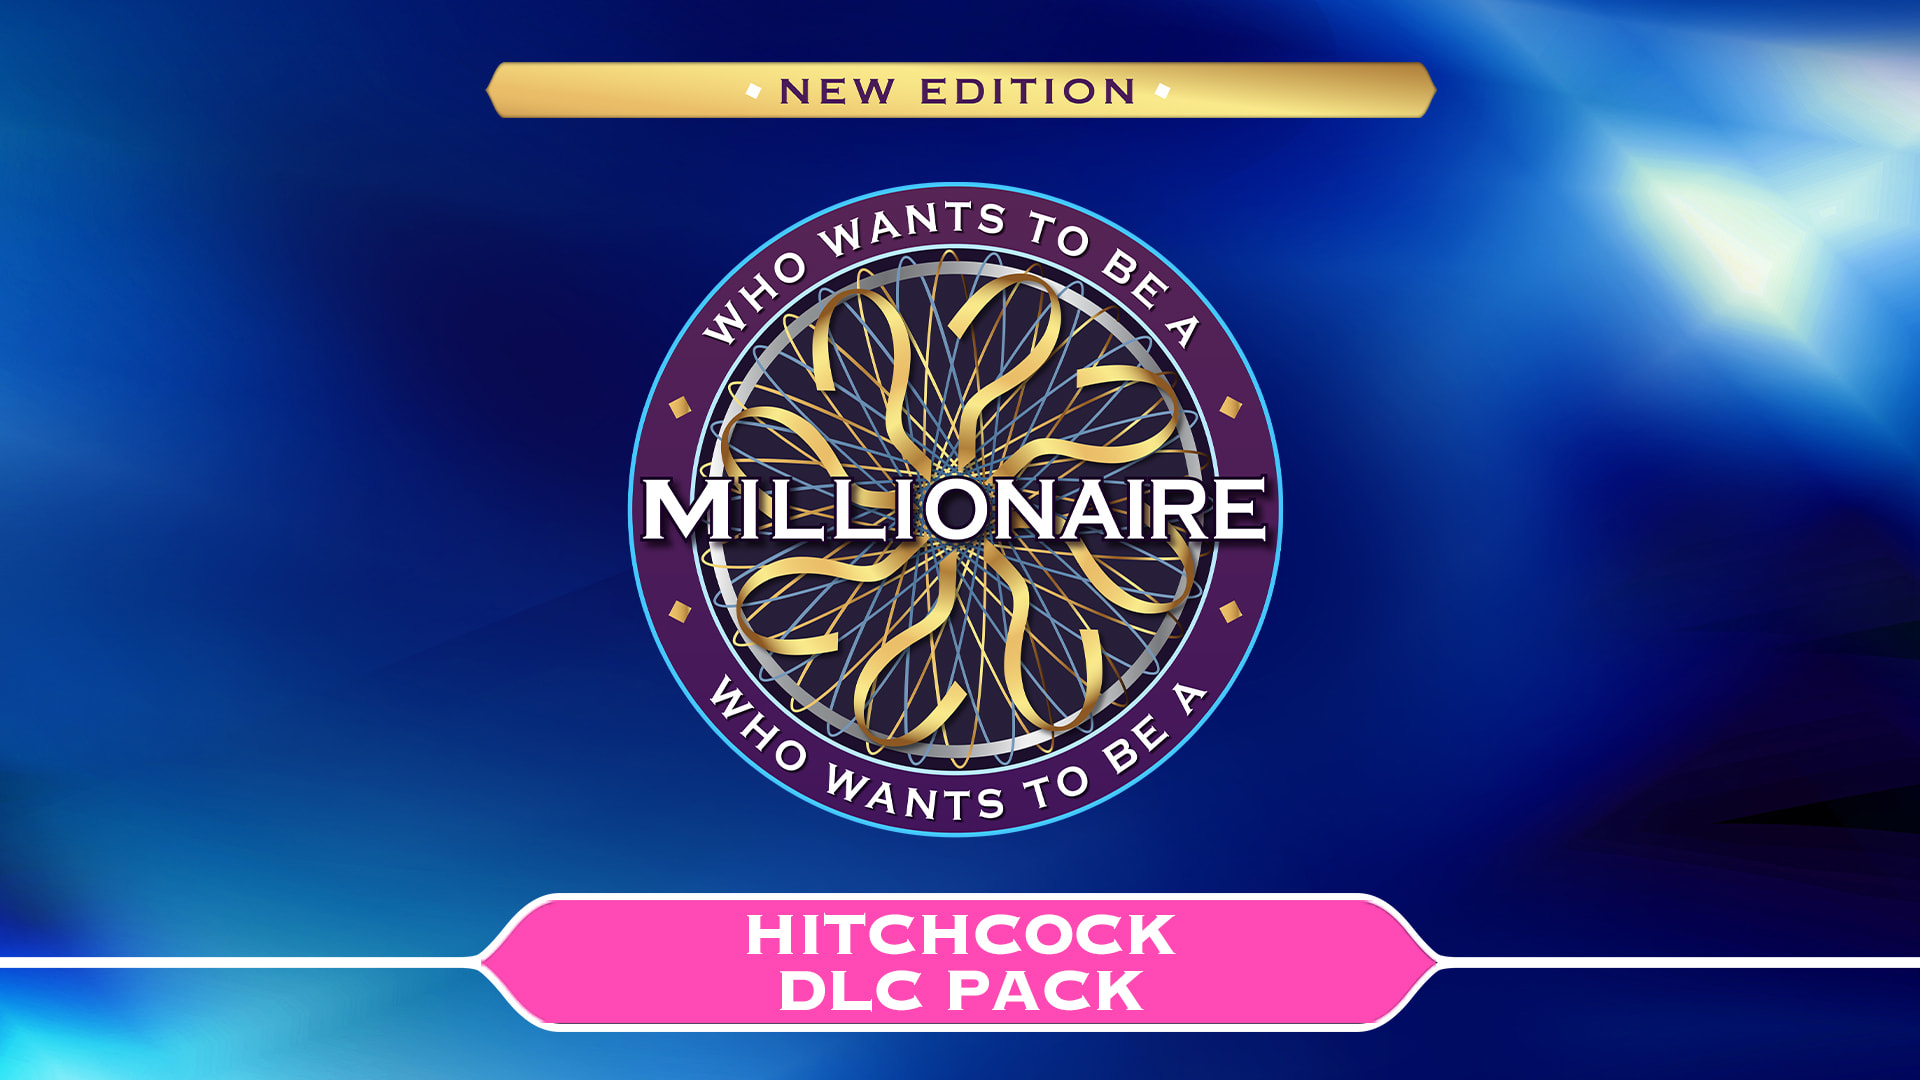 Who Wants To Be A Millionaire? - Hitchcock DLC Pack